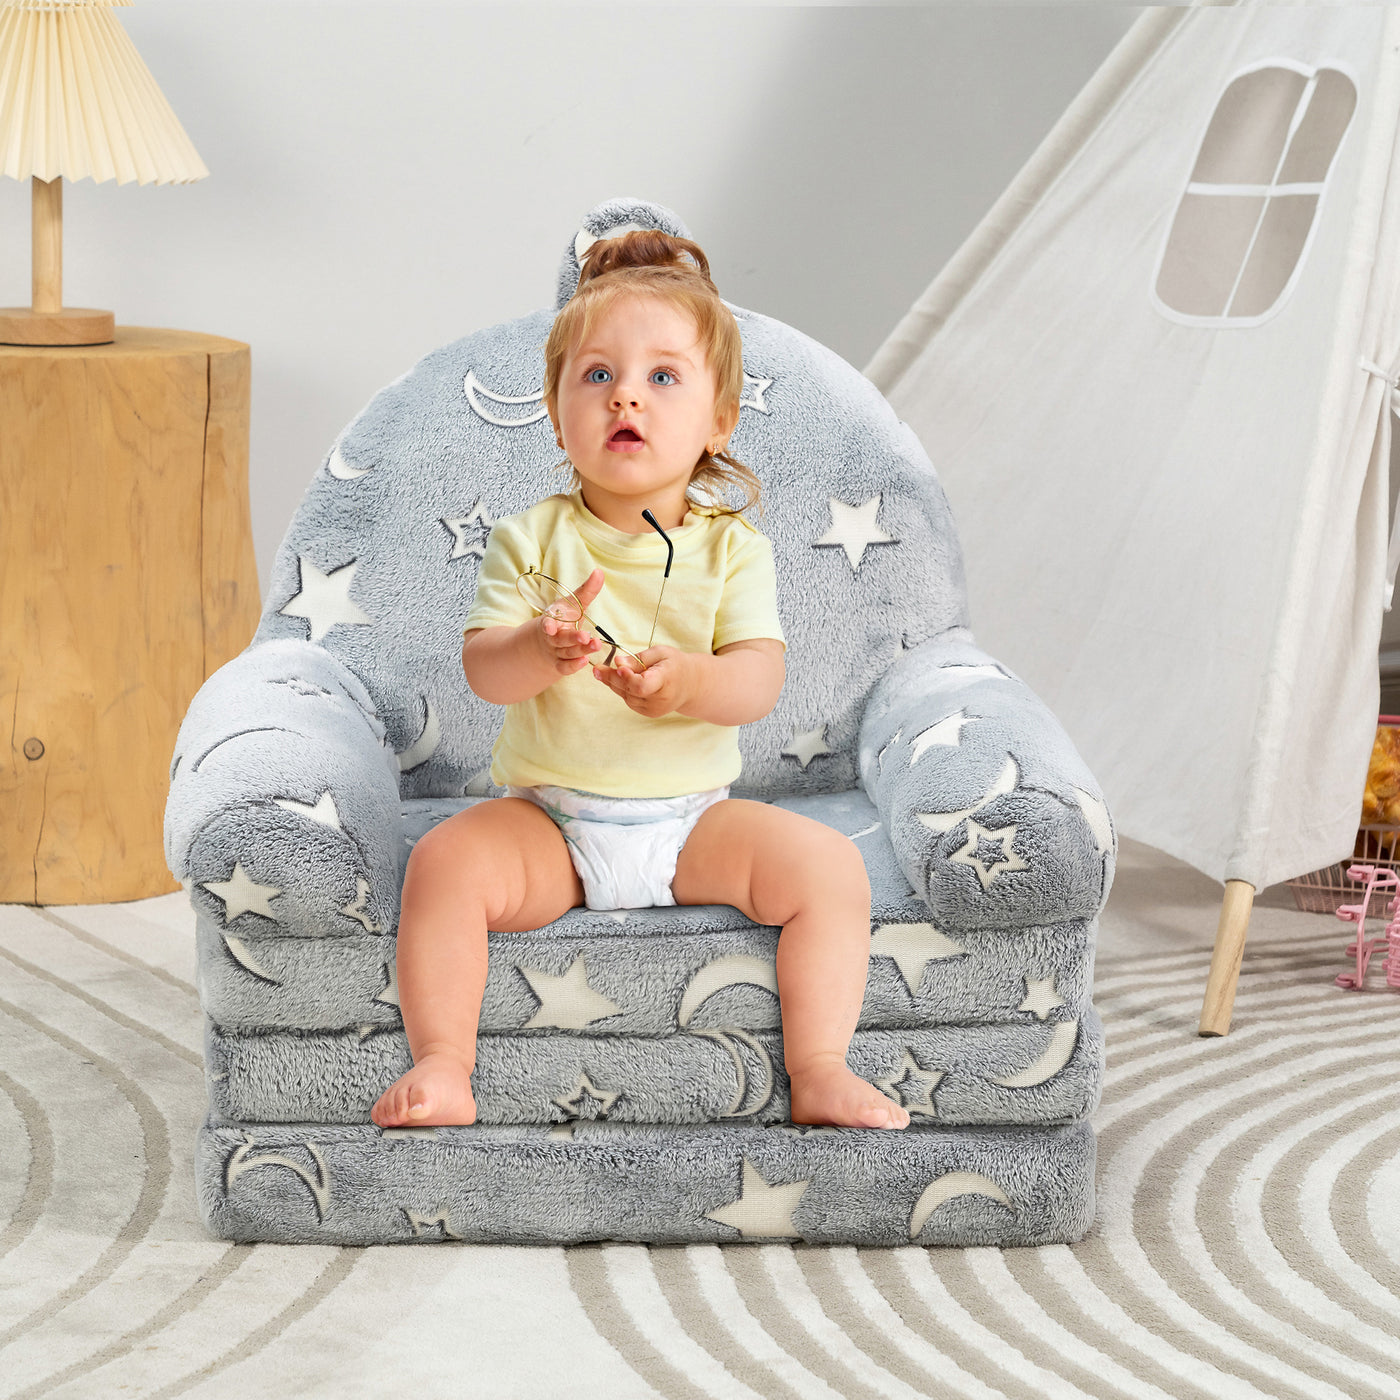 MAXYOYO Foldable Kids Sofa, Shiny Children Couch Backrest Armchair Bed with Pocket, Moon andStar Pattern